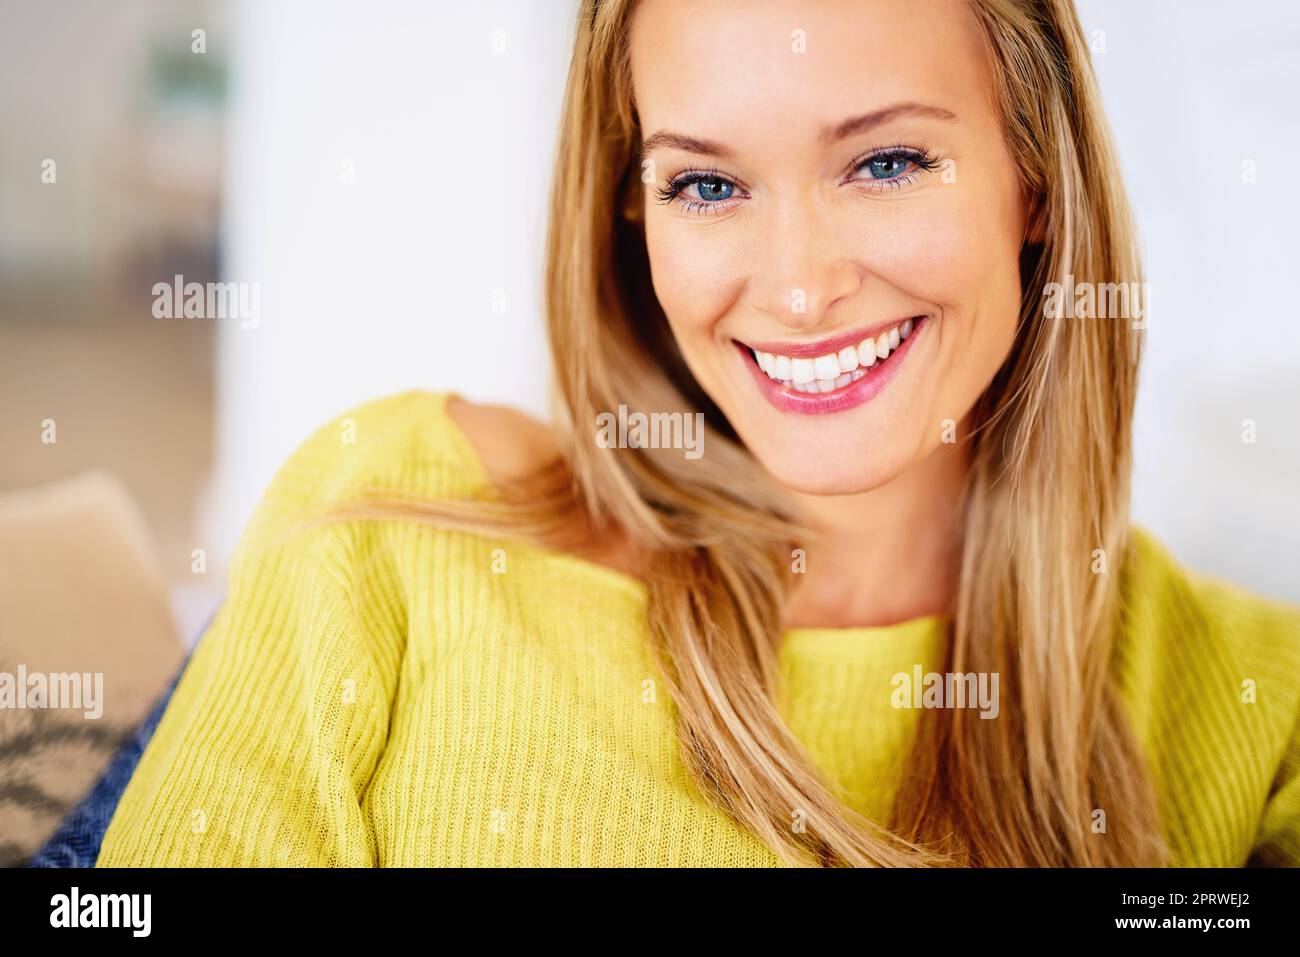 Her beauty is perfect. a happy young woman sitting on her sofa. Stock Photo